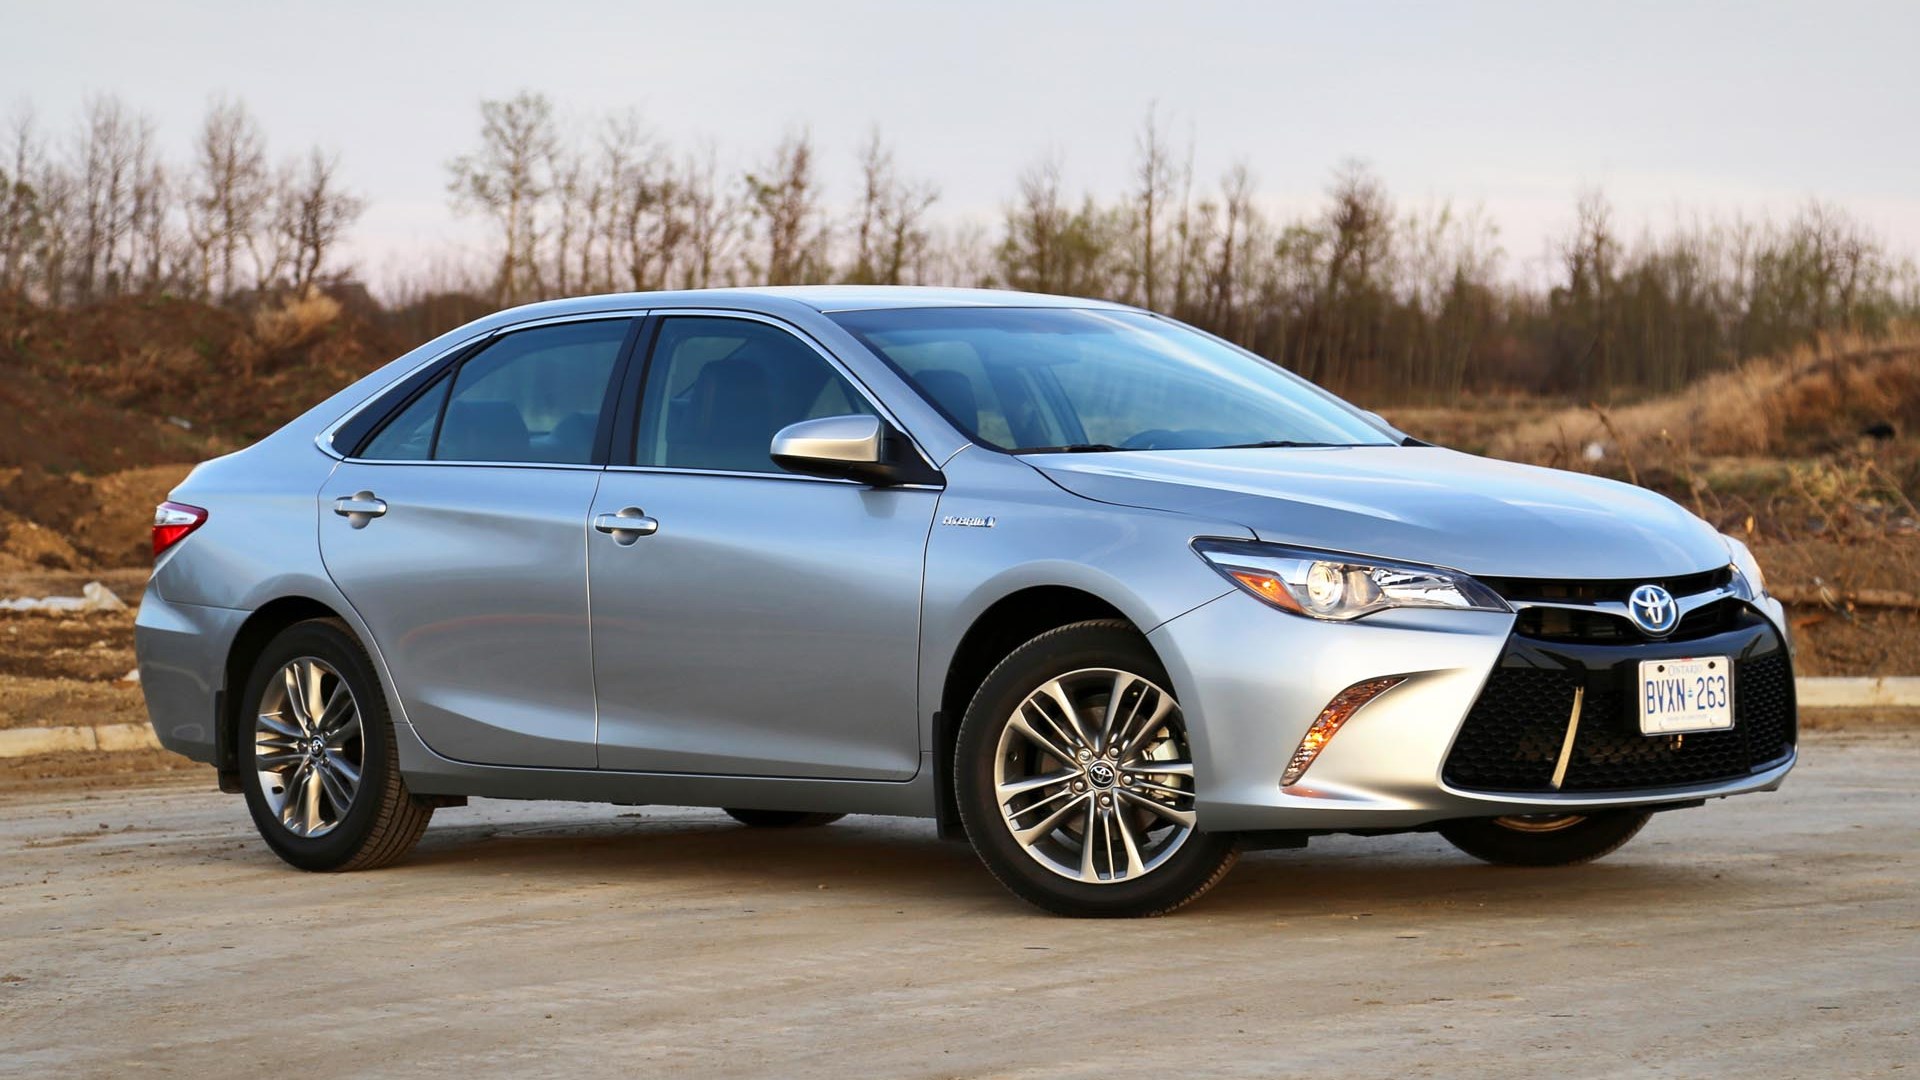 2015 Toyota Camry Hybrid Test Drive Review | AutoTrader.ca